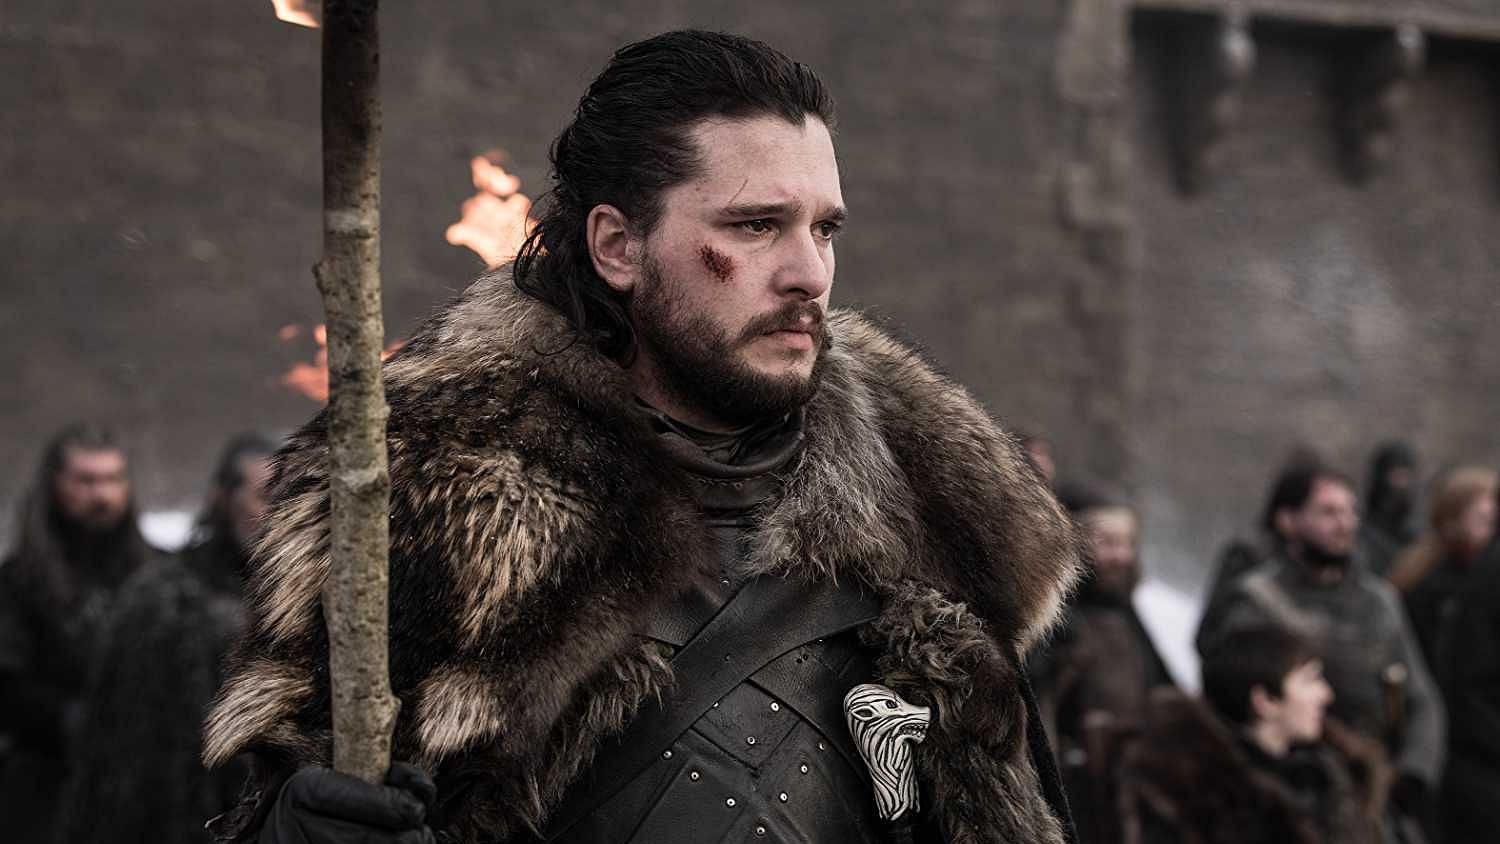 GoT S8 E4 sees the closing of a few chapters and the reopening of others as the battle for the Iron Throne ensues.